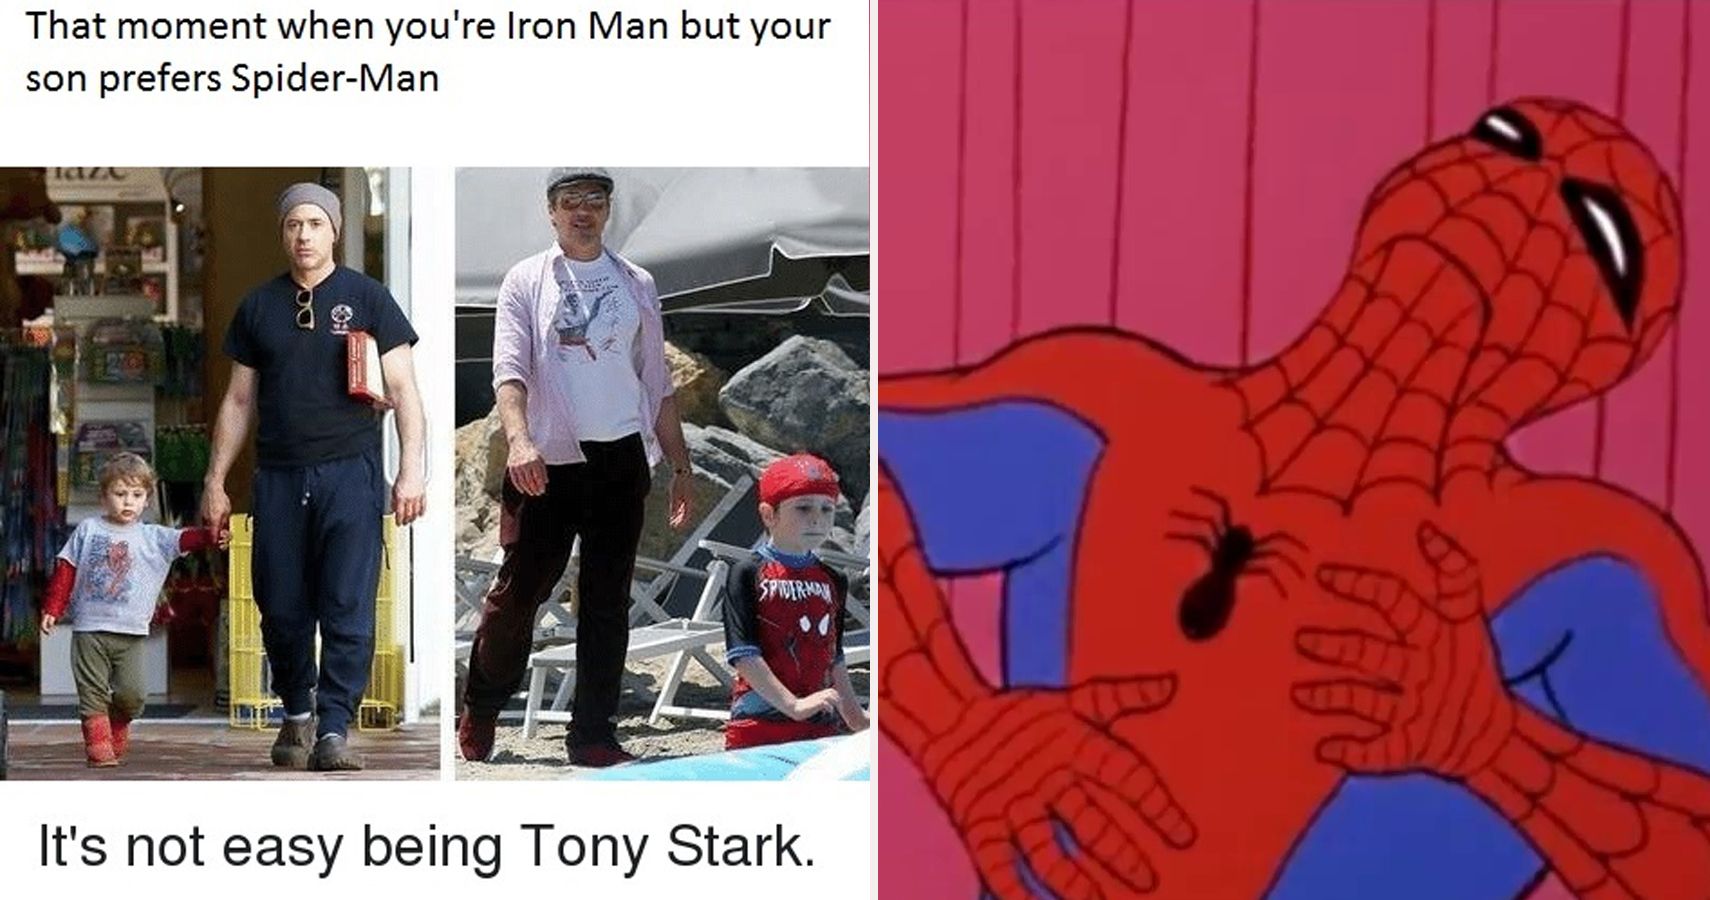 Marvel: 25 Iron Man And Spider-Man Memes That Are Too Hilarious For Words